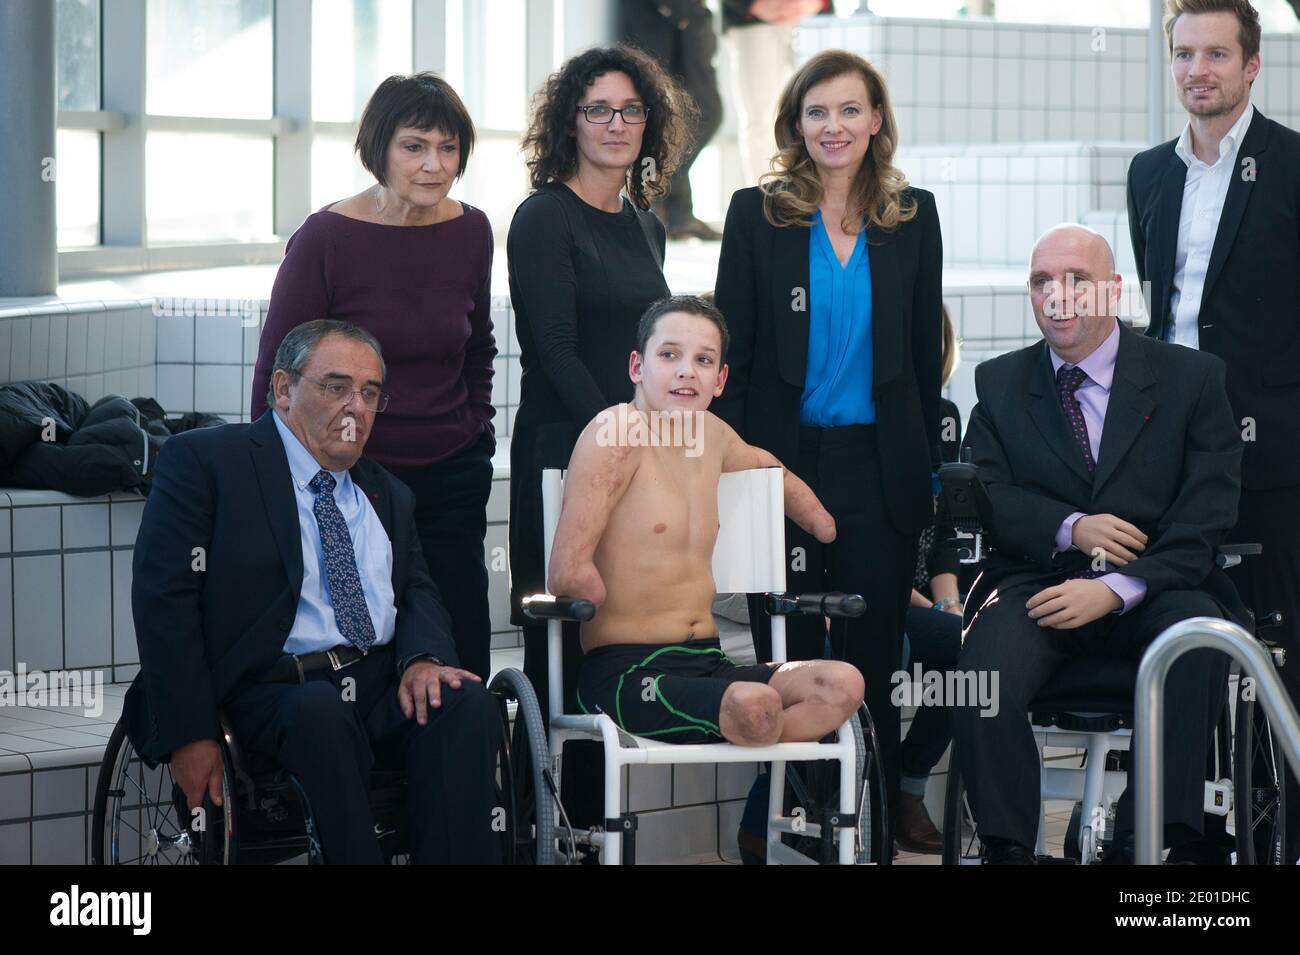 Junior Minister for Disabled People Marie-Arlette Carlotti and companion of France's President Valerie Trierweiler pose with Theo, a 13-year-old 4-limb amputee, next to his mother, four-member amputee swimmer Philippe Croizon, paralympic 100m butterfly - S8 champion Charles Rozoy and Handisports Federation President Gerard Masson on November 27, 2013 in Vichy, central France. Theo is a grant holder of the disabled sports branch of the French Expertise and Performance Ressource Centre (CREPS) of Vichy Auvergne, where he trains in swimming. In early 2013, he competed for the first time in the Fr Stock Photo